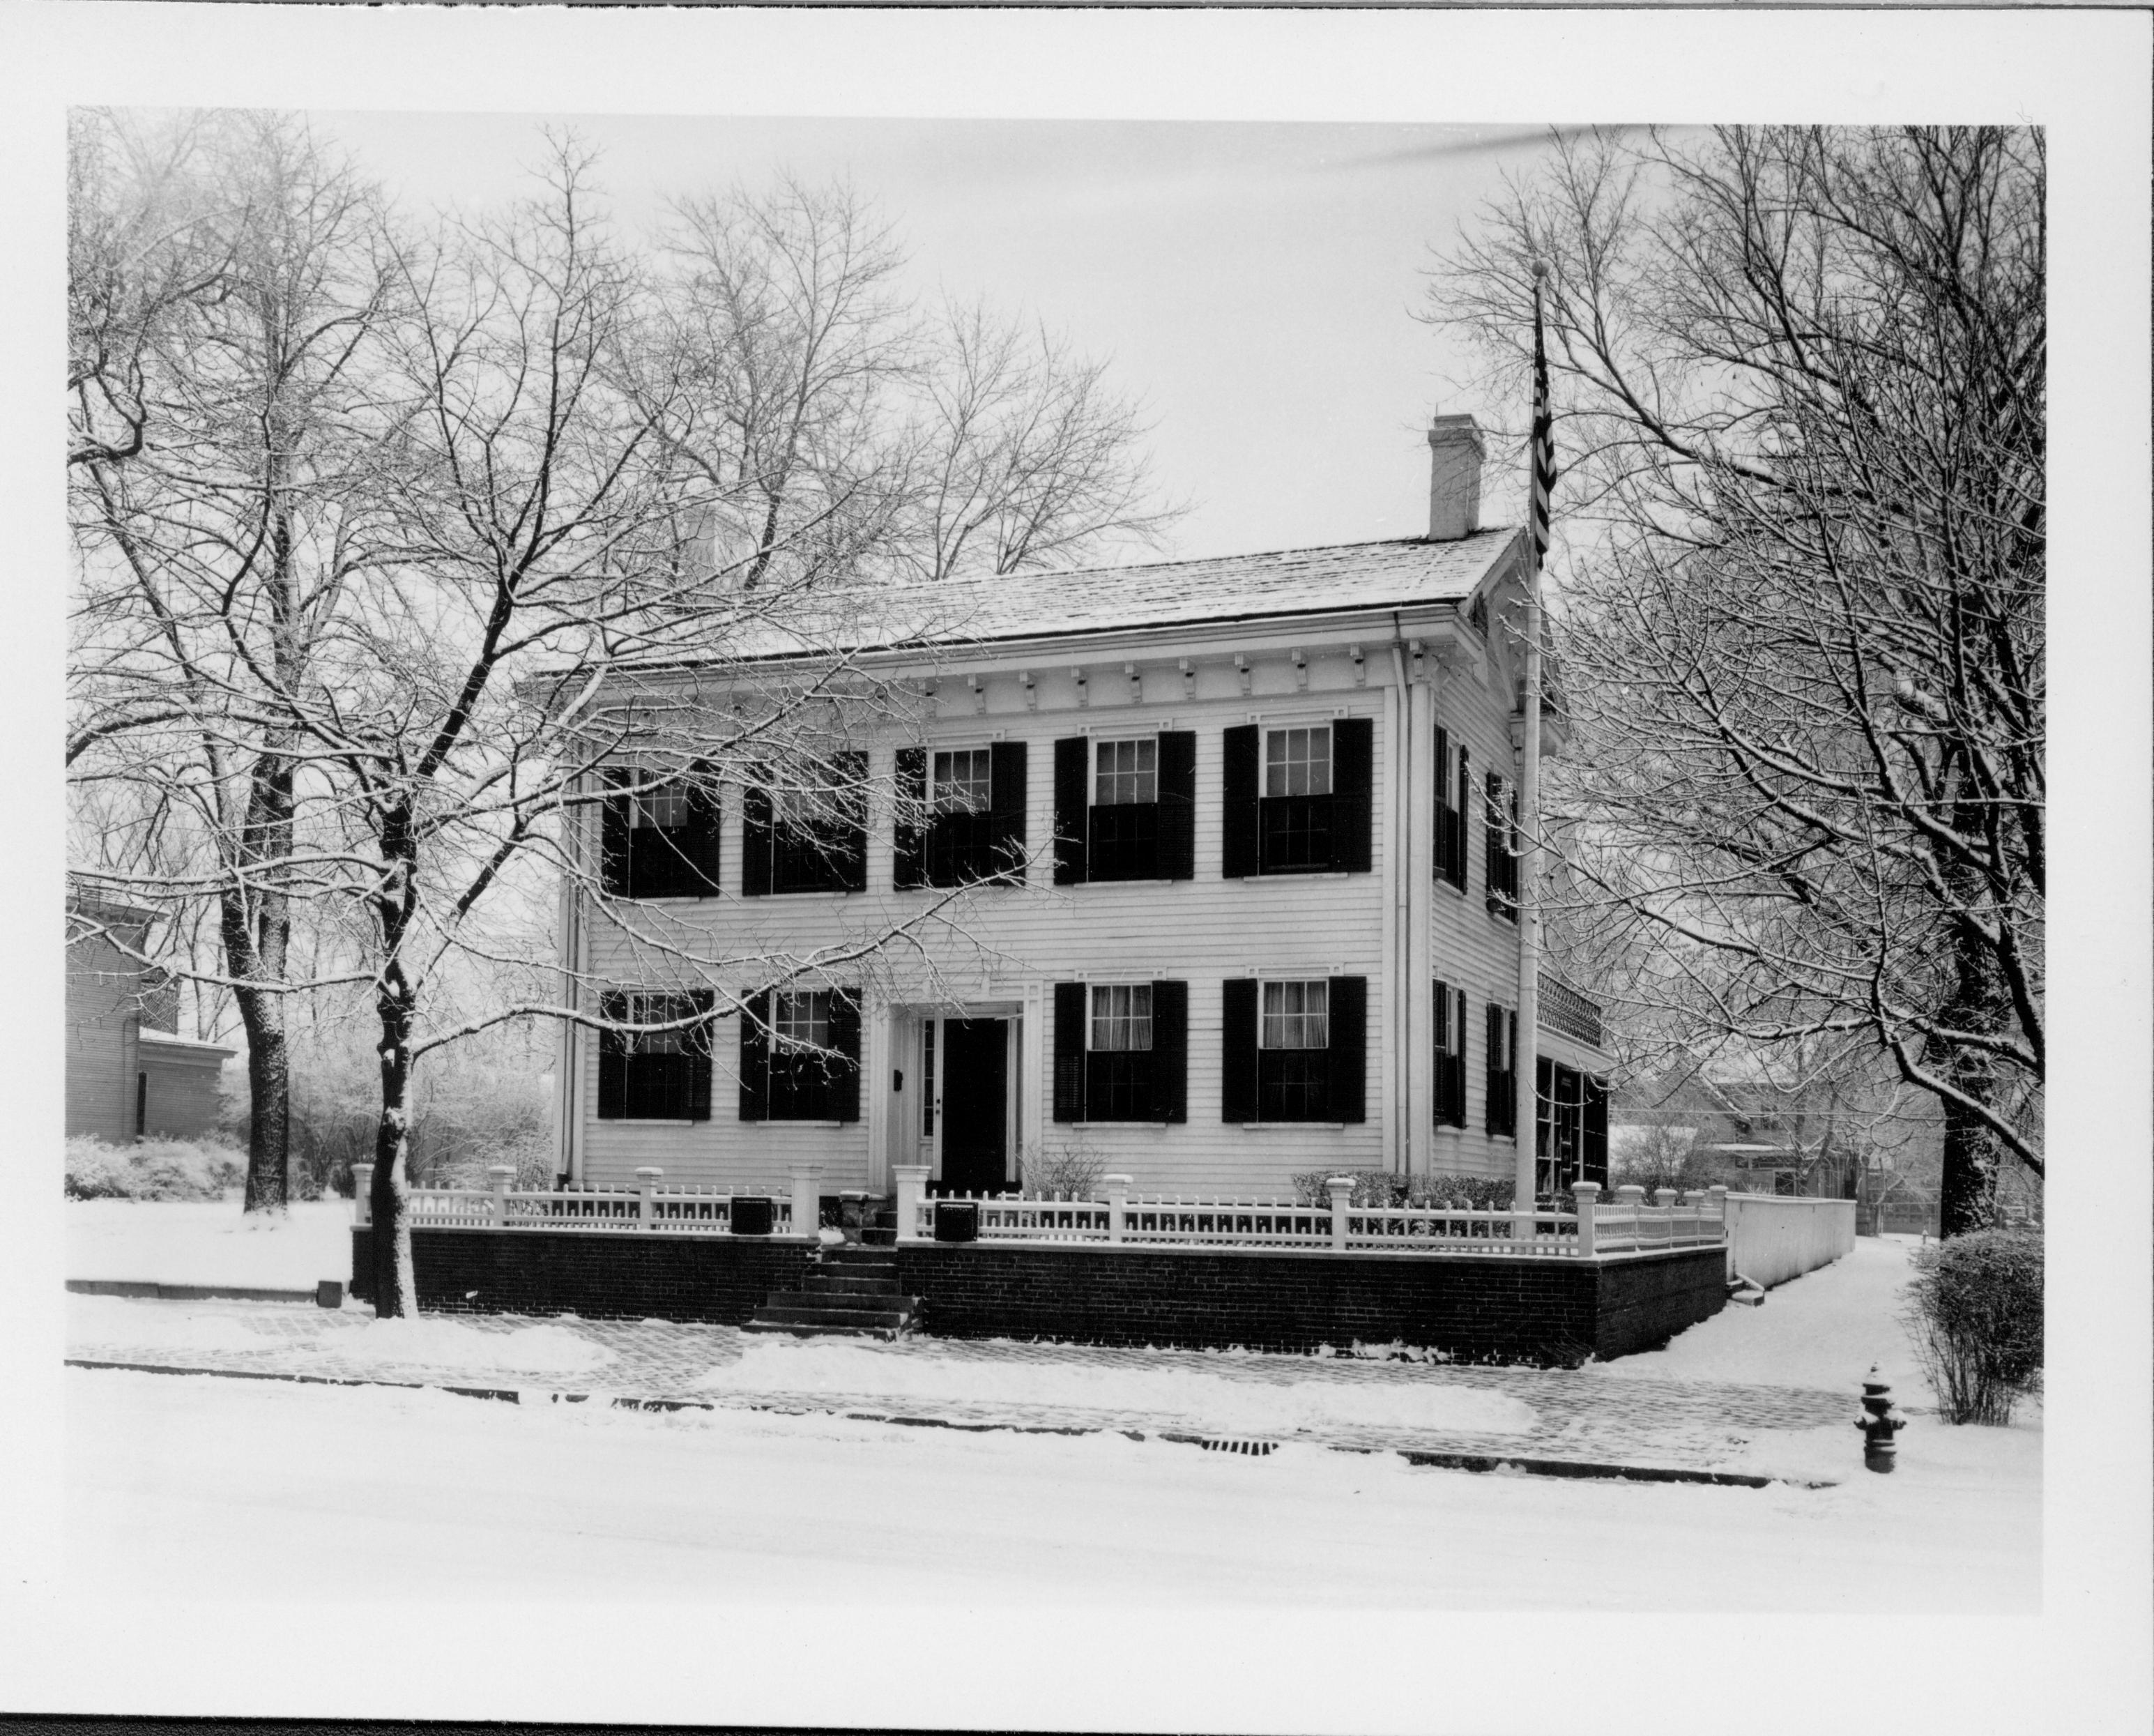 Lincoln Home west (front) elevation in winter, with flagpole on corner behind picket fence.  Fire hydrant visible on corner of brick plaza.  Two story houses visible on Bugg lot (Block 10, Lot 5) on left, and behind Home on Kercheval lot (Block 10, lot 9) in background right.  Back porch is screened in.  Looking Northeast from 8th Street Lincoln Home, 8th Street, snow, Bugg, Kercheval, flagpole, screened back porch